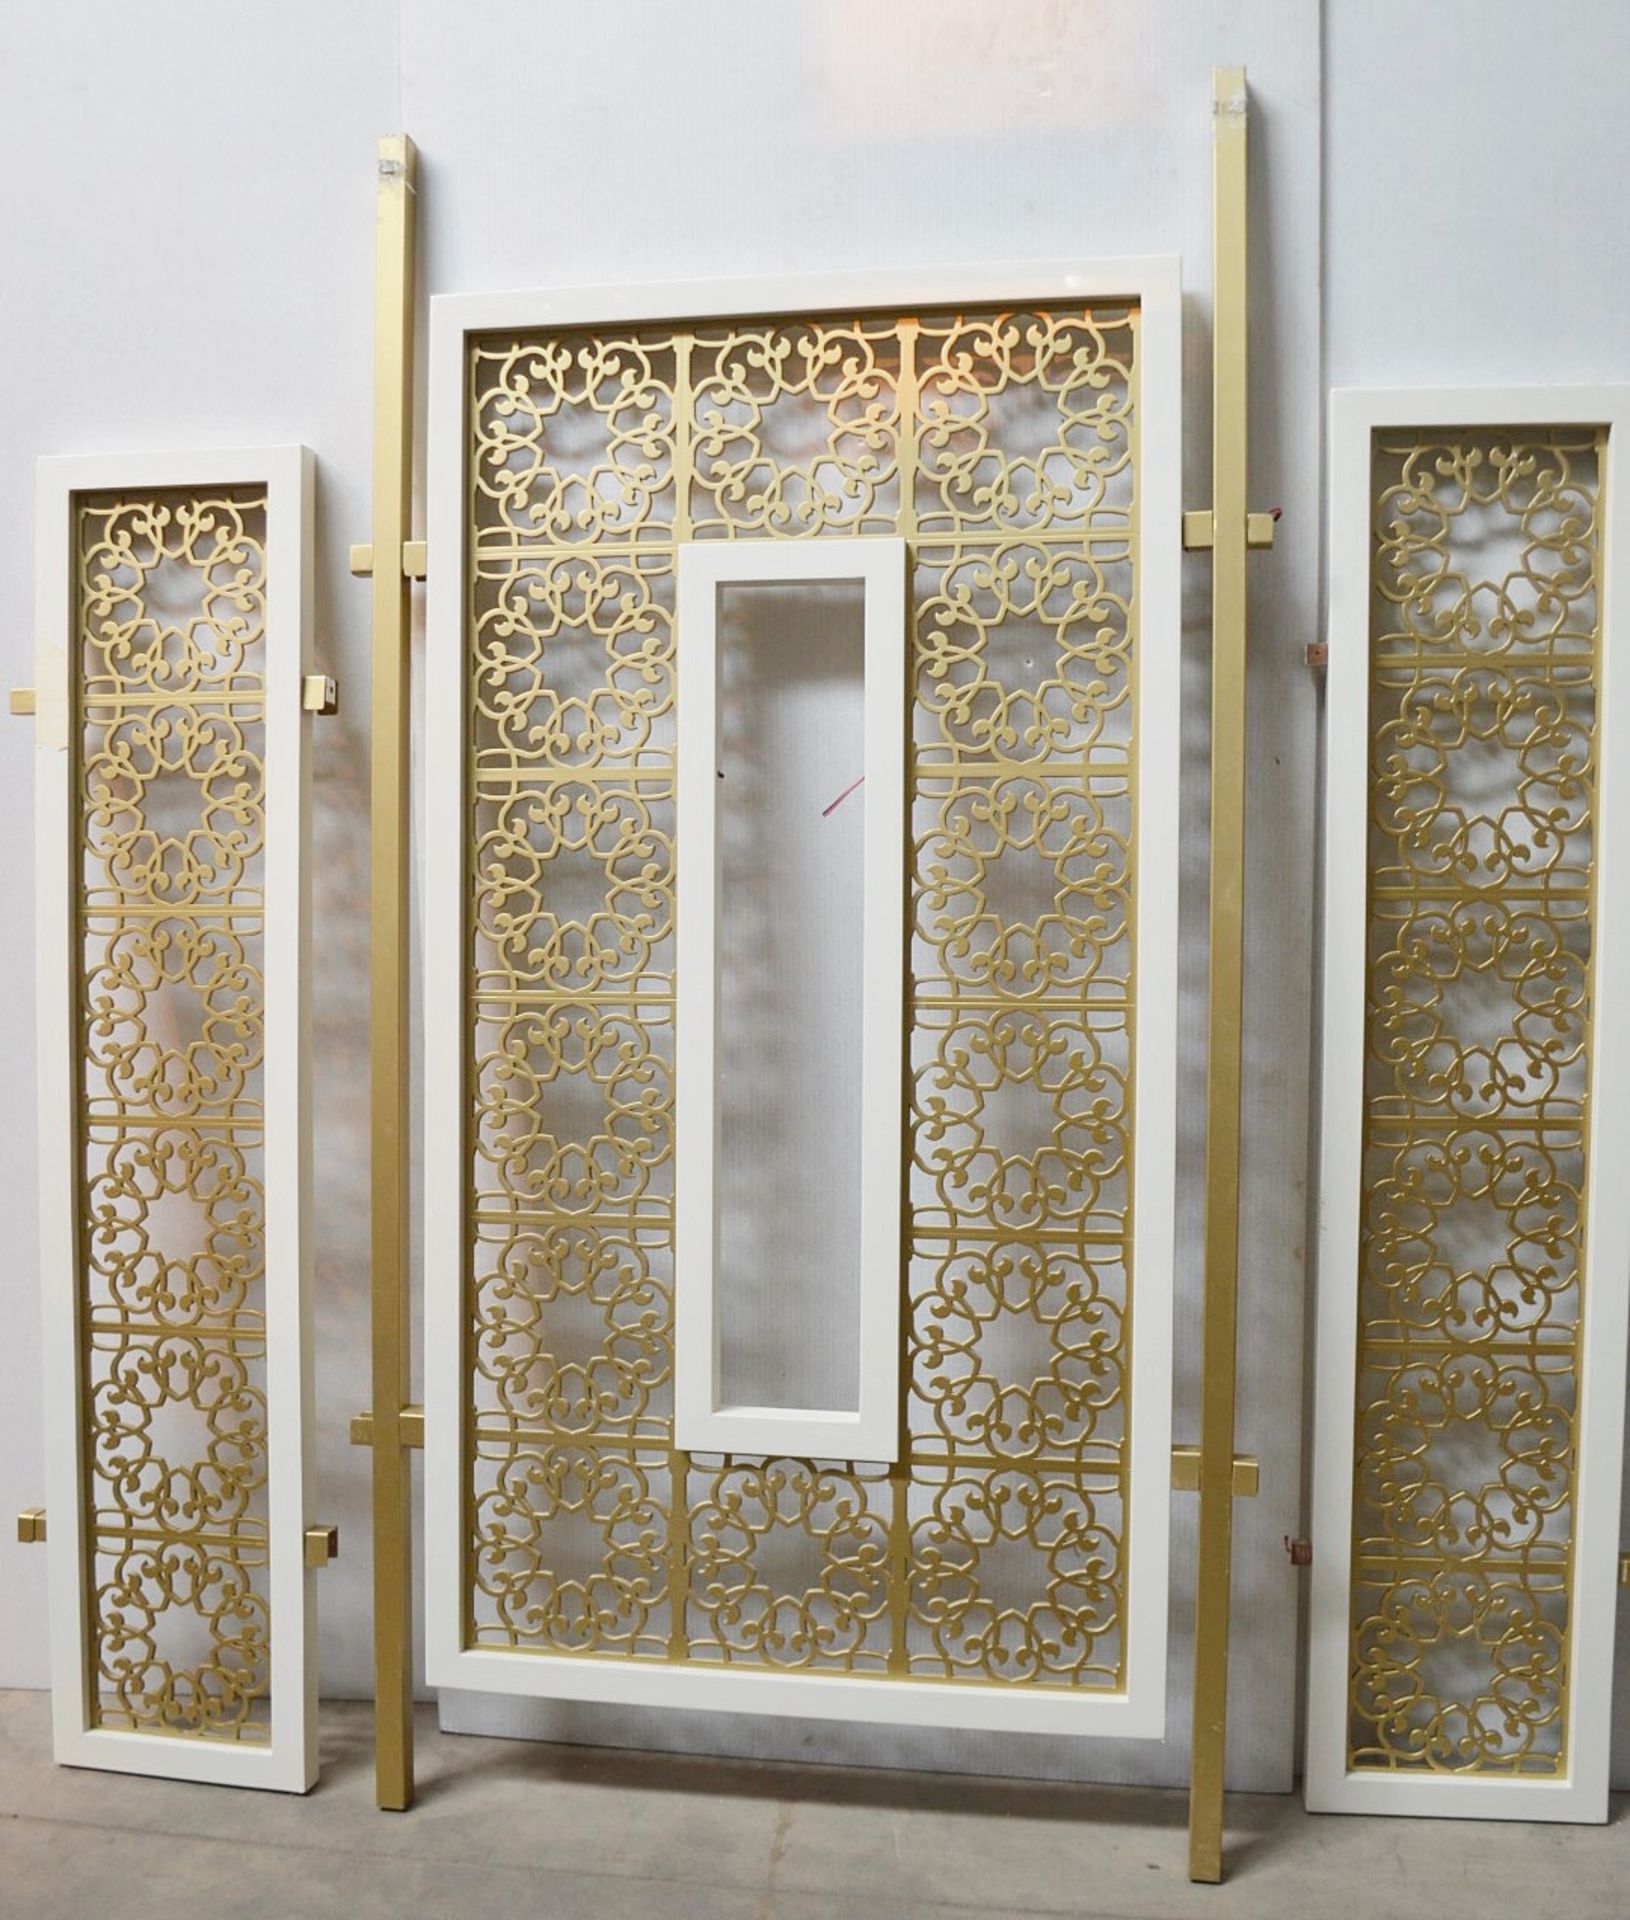 A Set Of 3 x Moroccan-style Room Divider Screen Panels With Pendant Light - Ref: HMS108 - CL668 - - Image 8 of 10